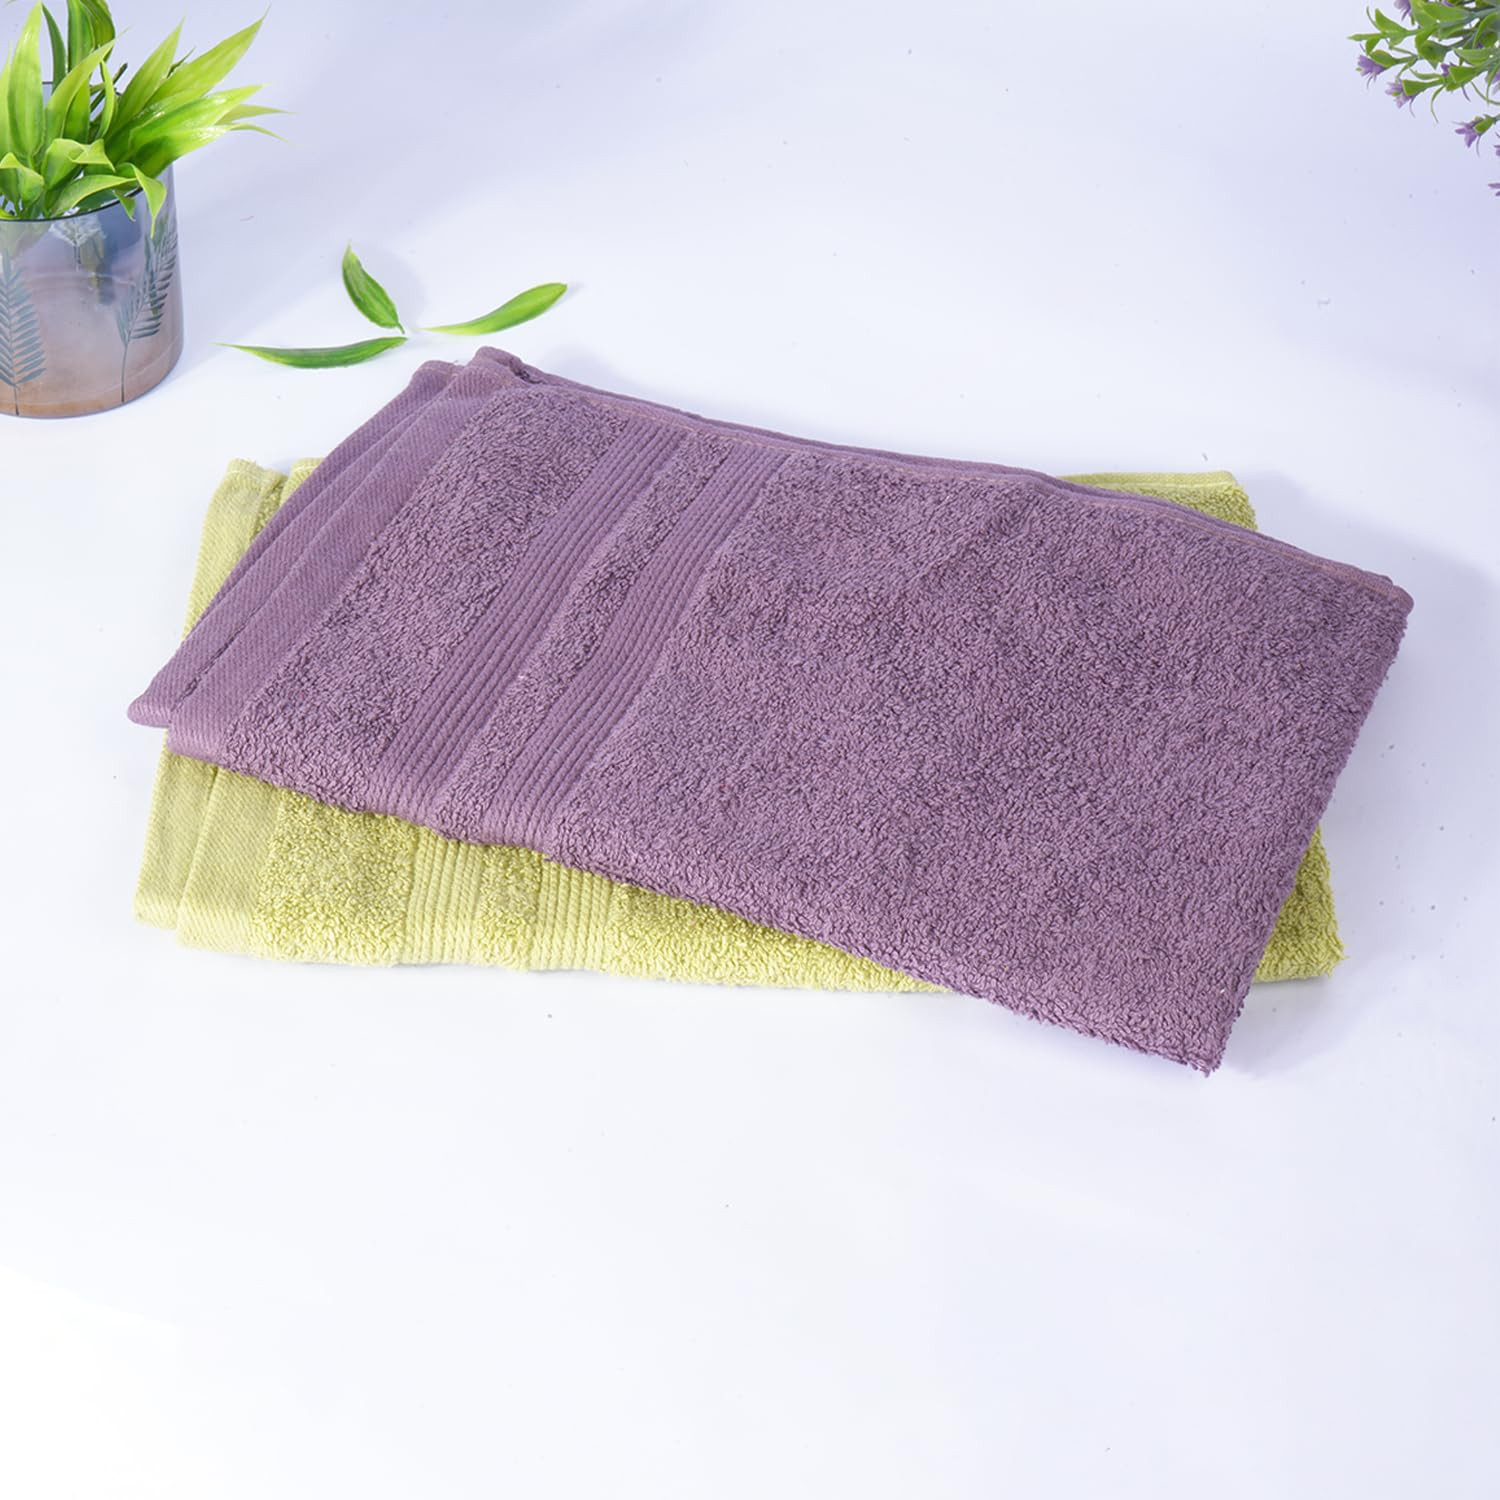 Kuber Industries 525 GSM Cotton Hand towels |Super Soft, Quick Absorbent & Anti-Bacterial|Gym & Workout Towels|Pack of 2 (Purple & Green)